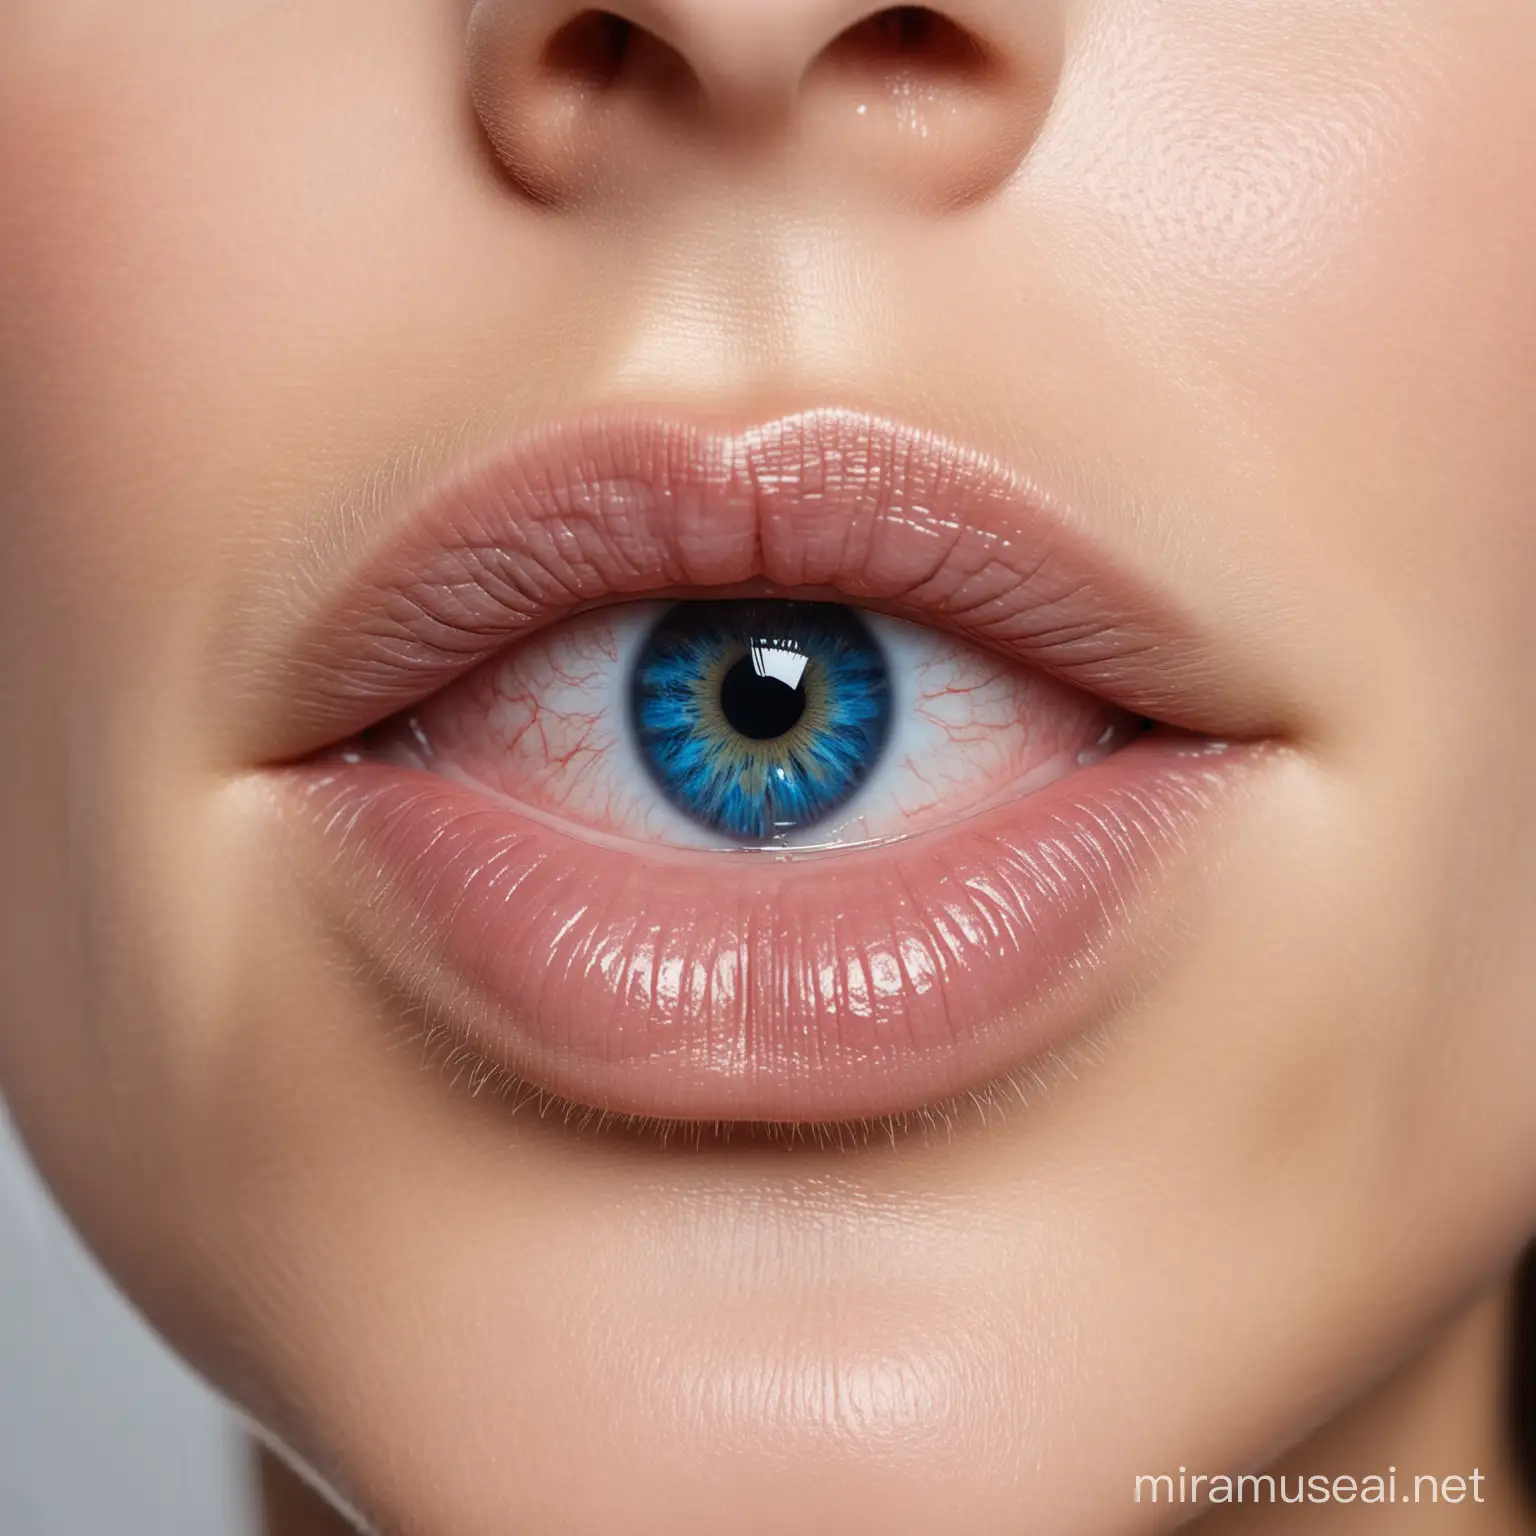 opened woman's mouth. There is girl's eye with blue iris inside mouth.